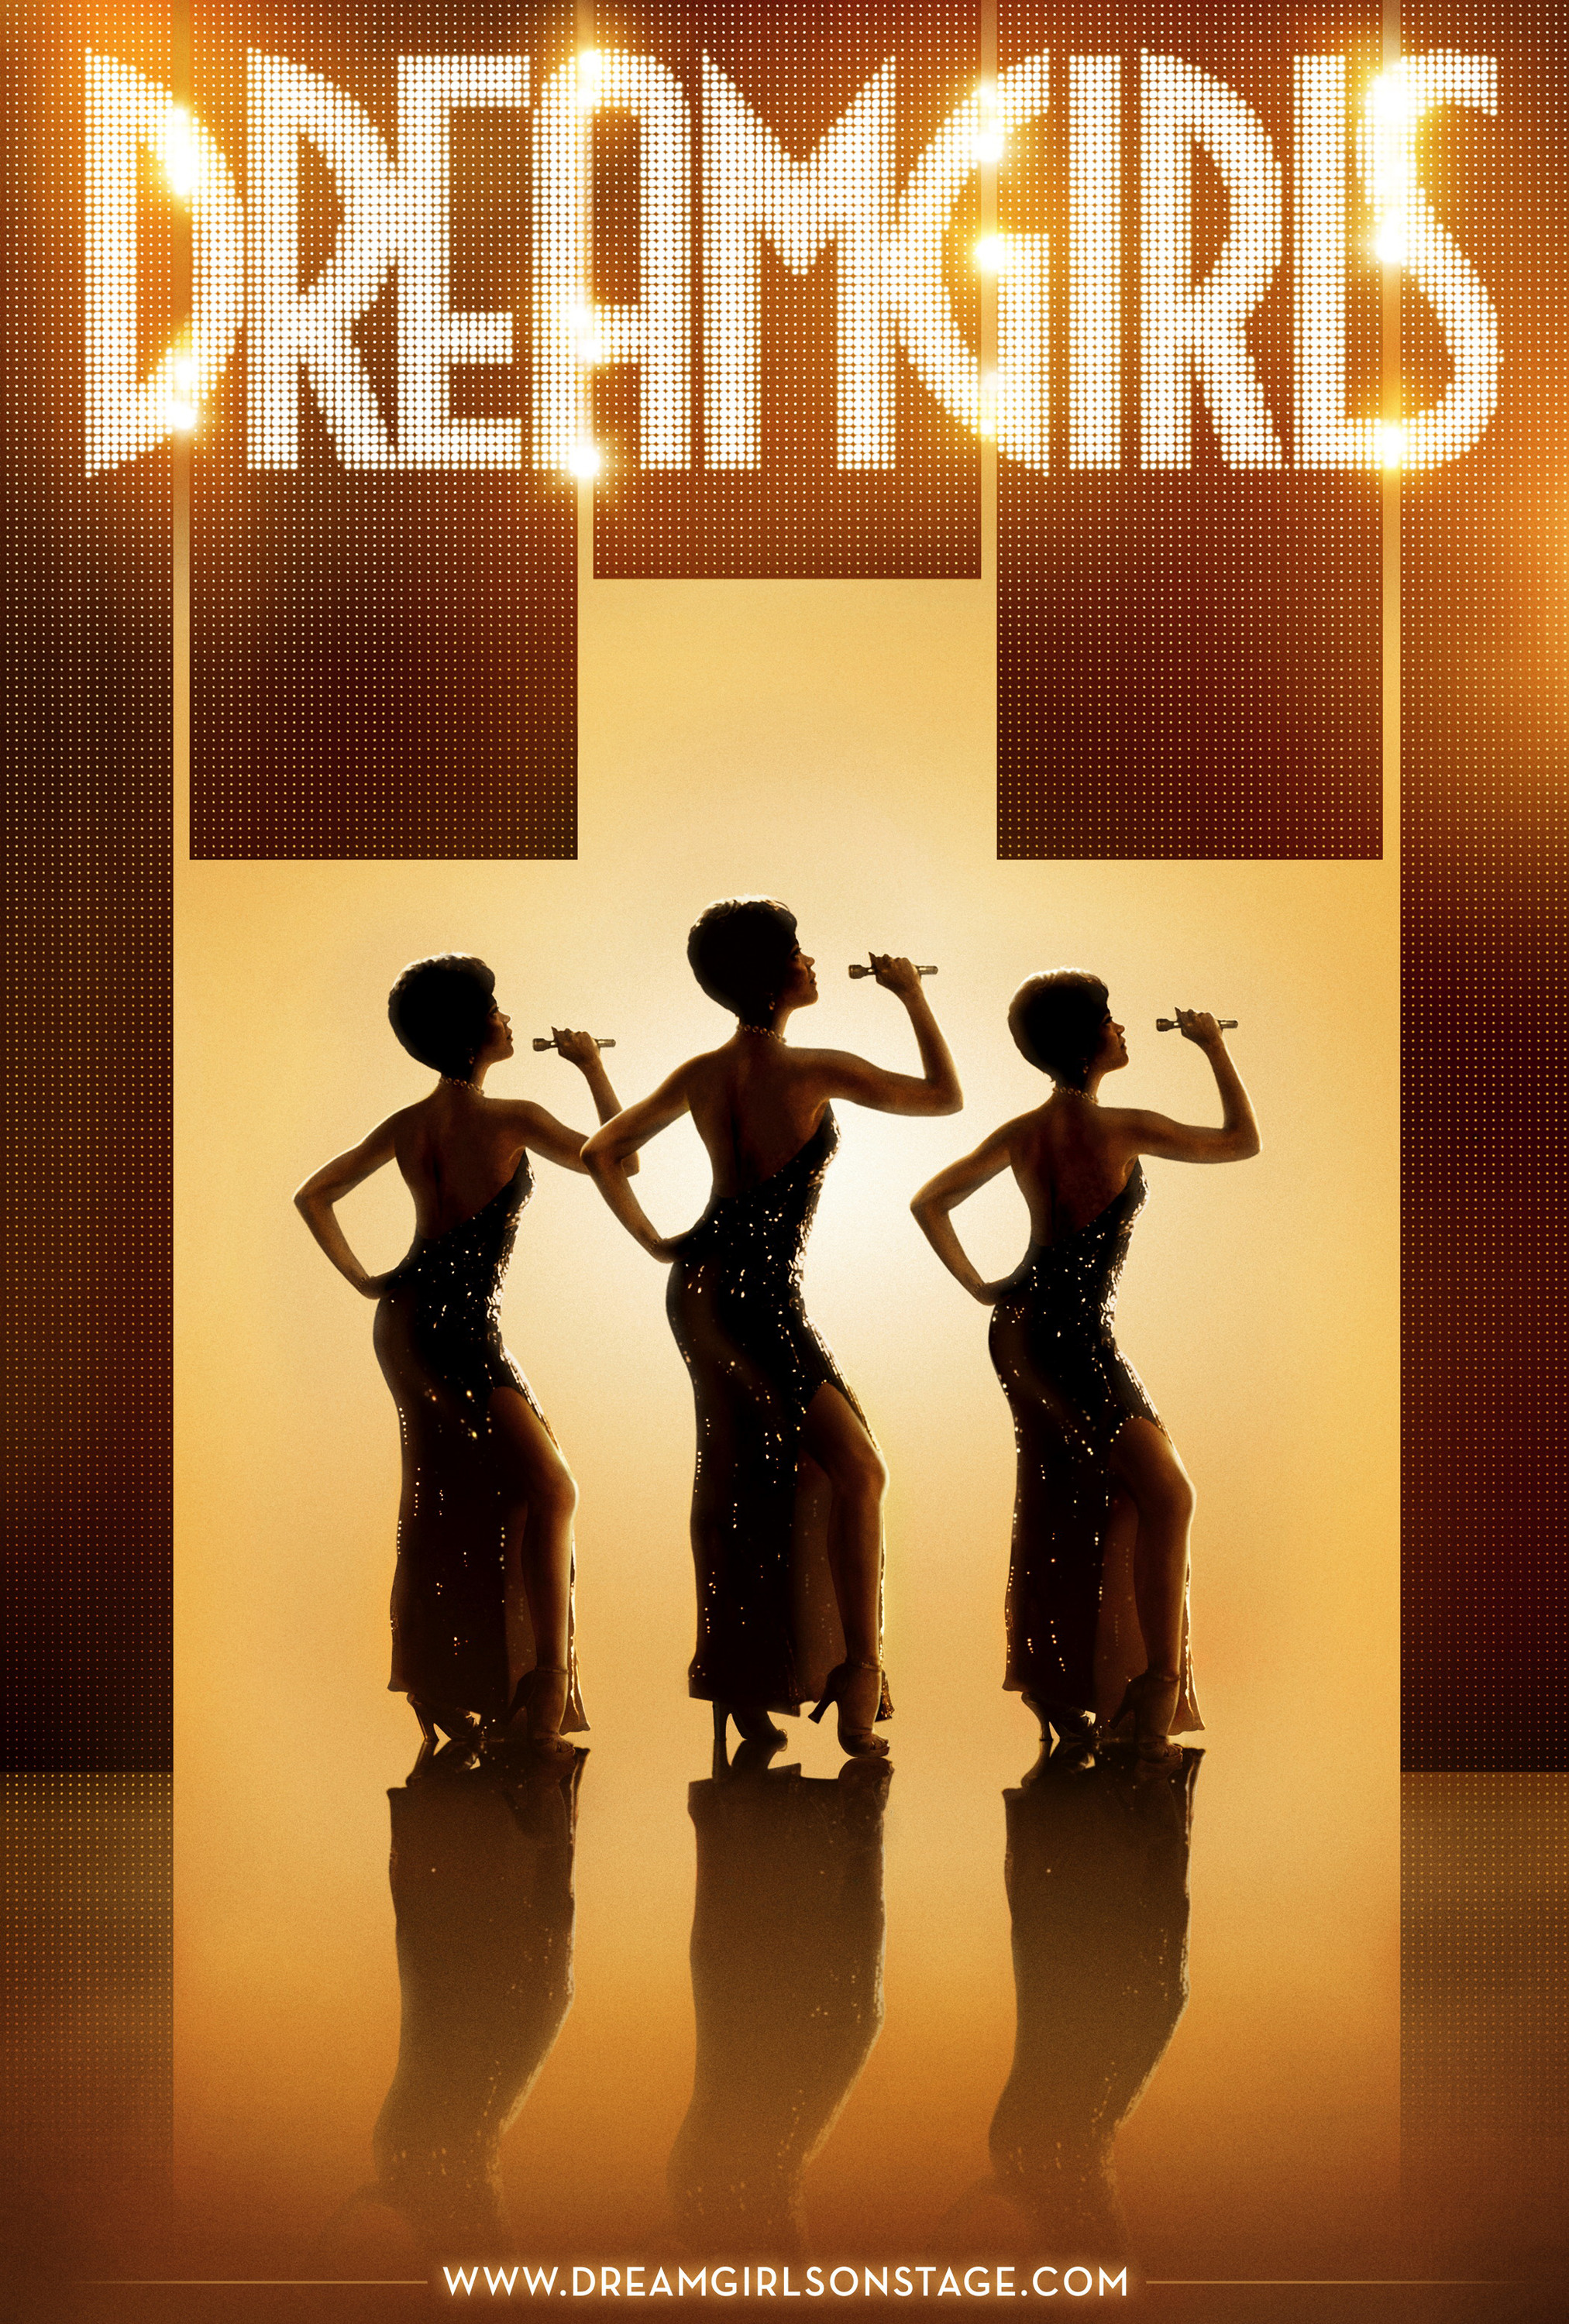 Mega Sized Broadway Poster Image for Dreamgirls 